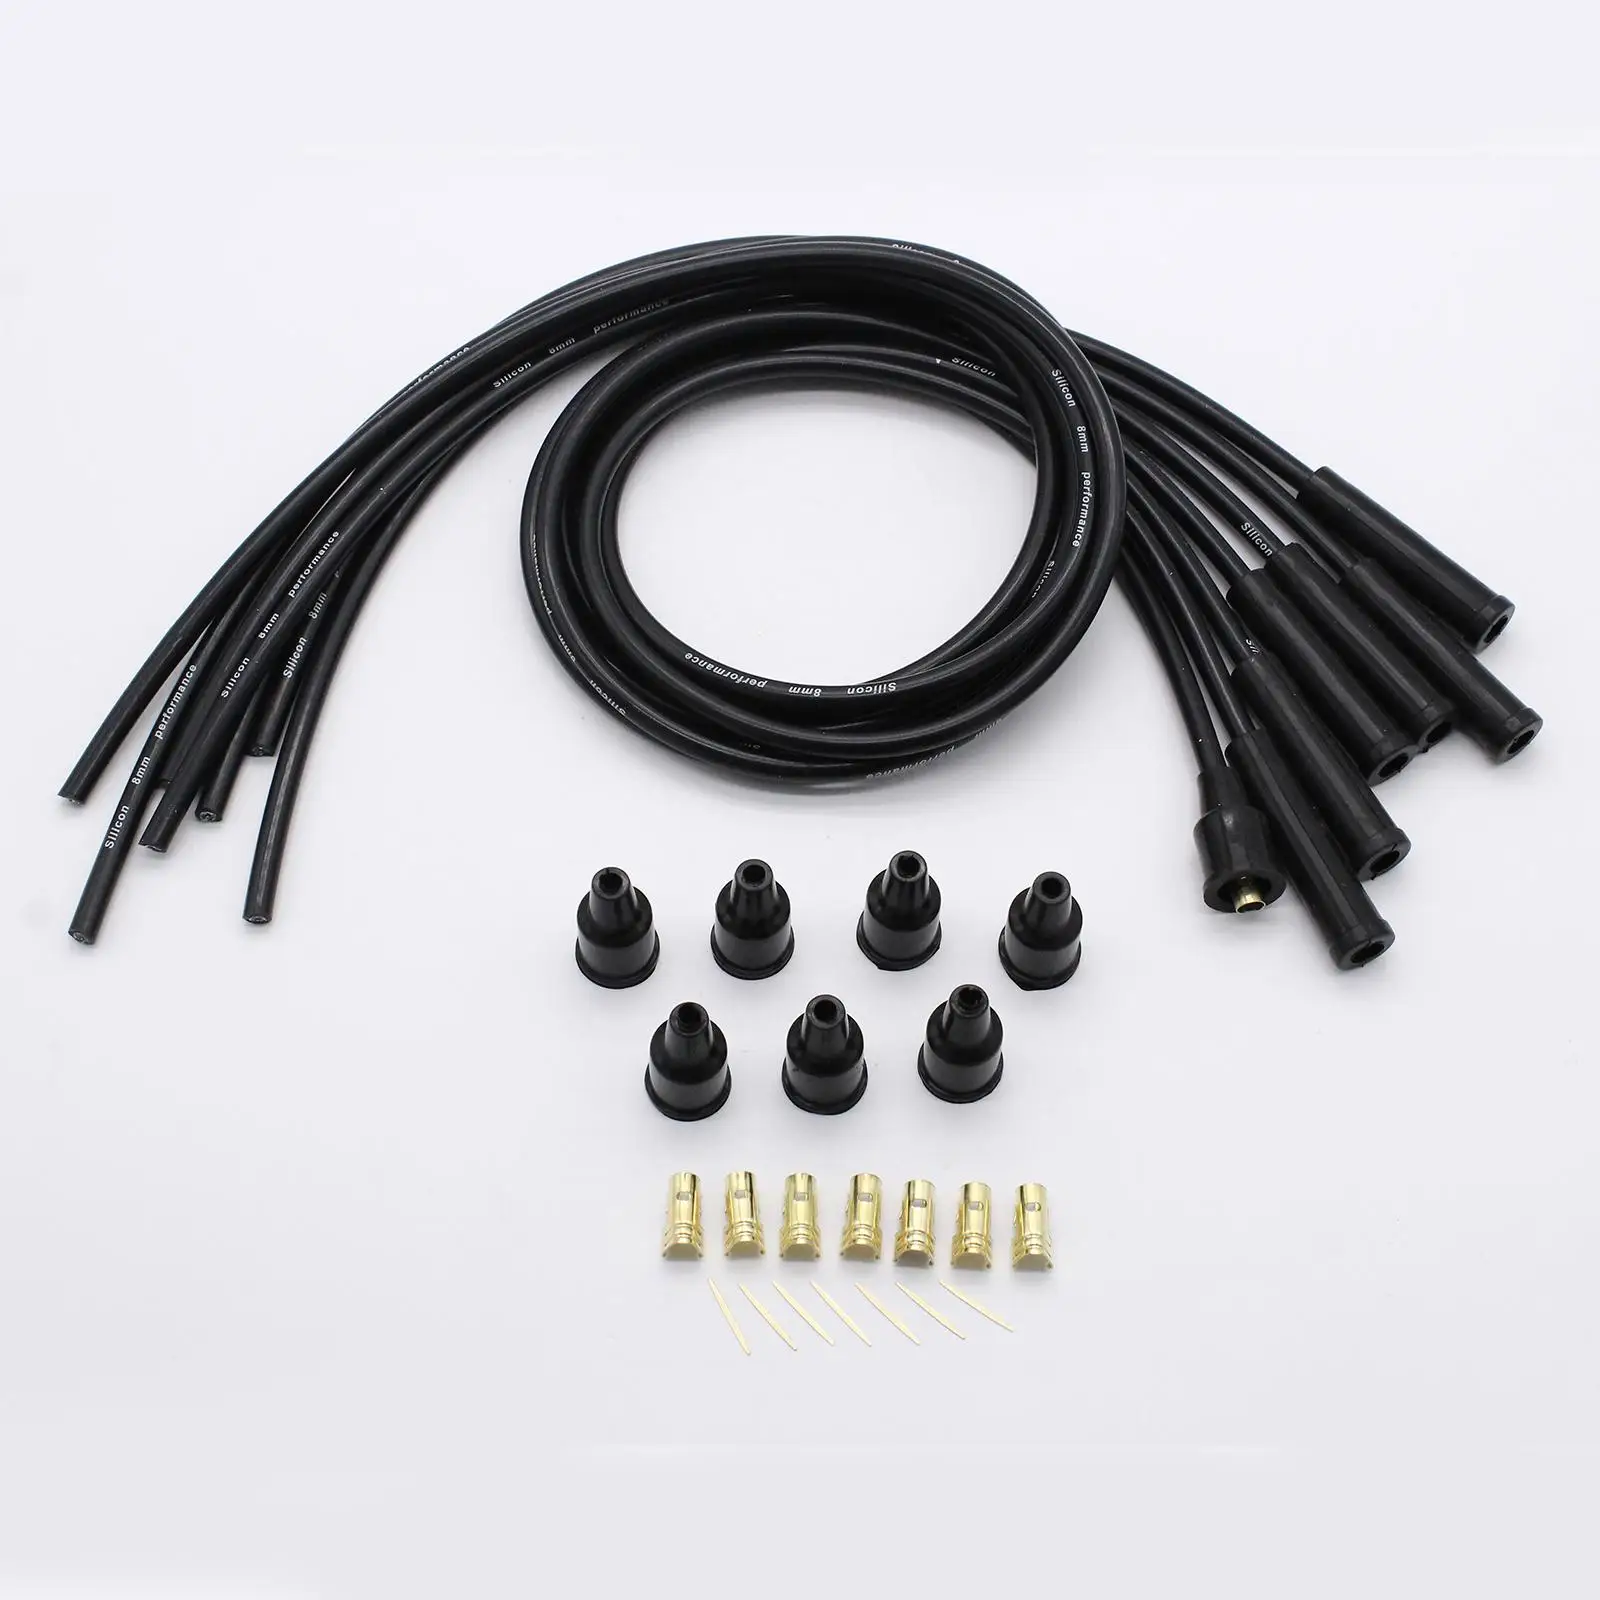 8mm HT Ignition Wires Easy to Use Universal for 6 Cylinder Classic Cars